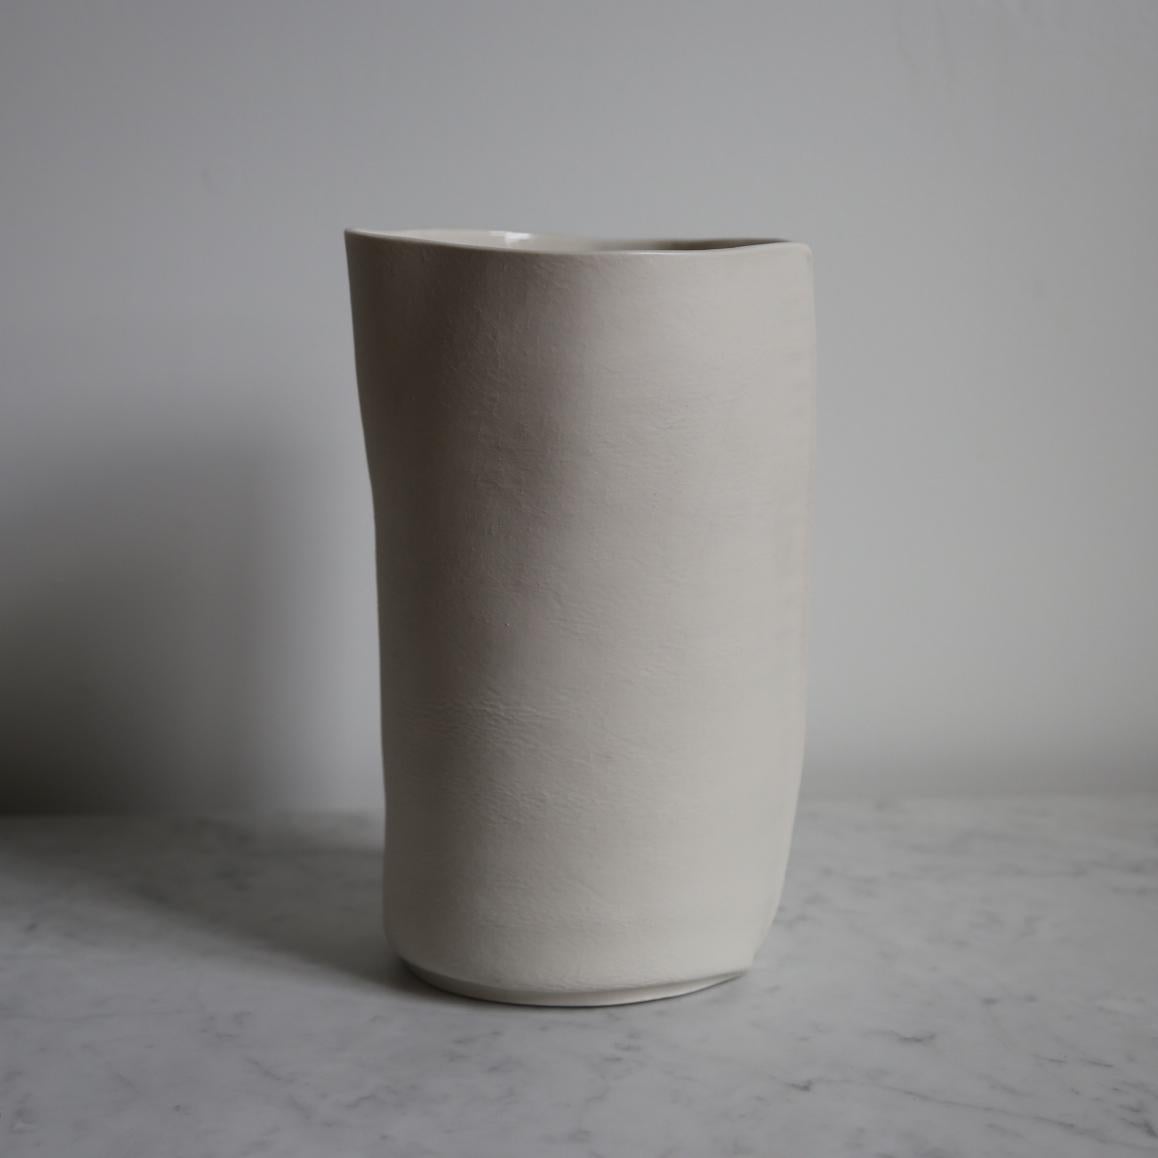 Clay Set of Three Unique Kawa Vases and Vessels, Porcelain, Ceramic, in Stock